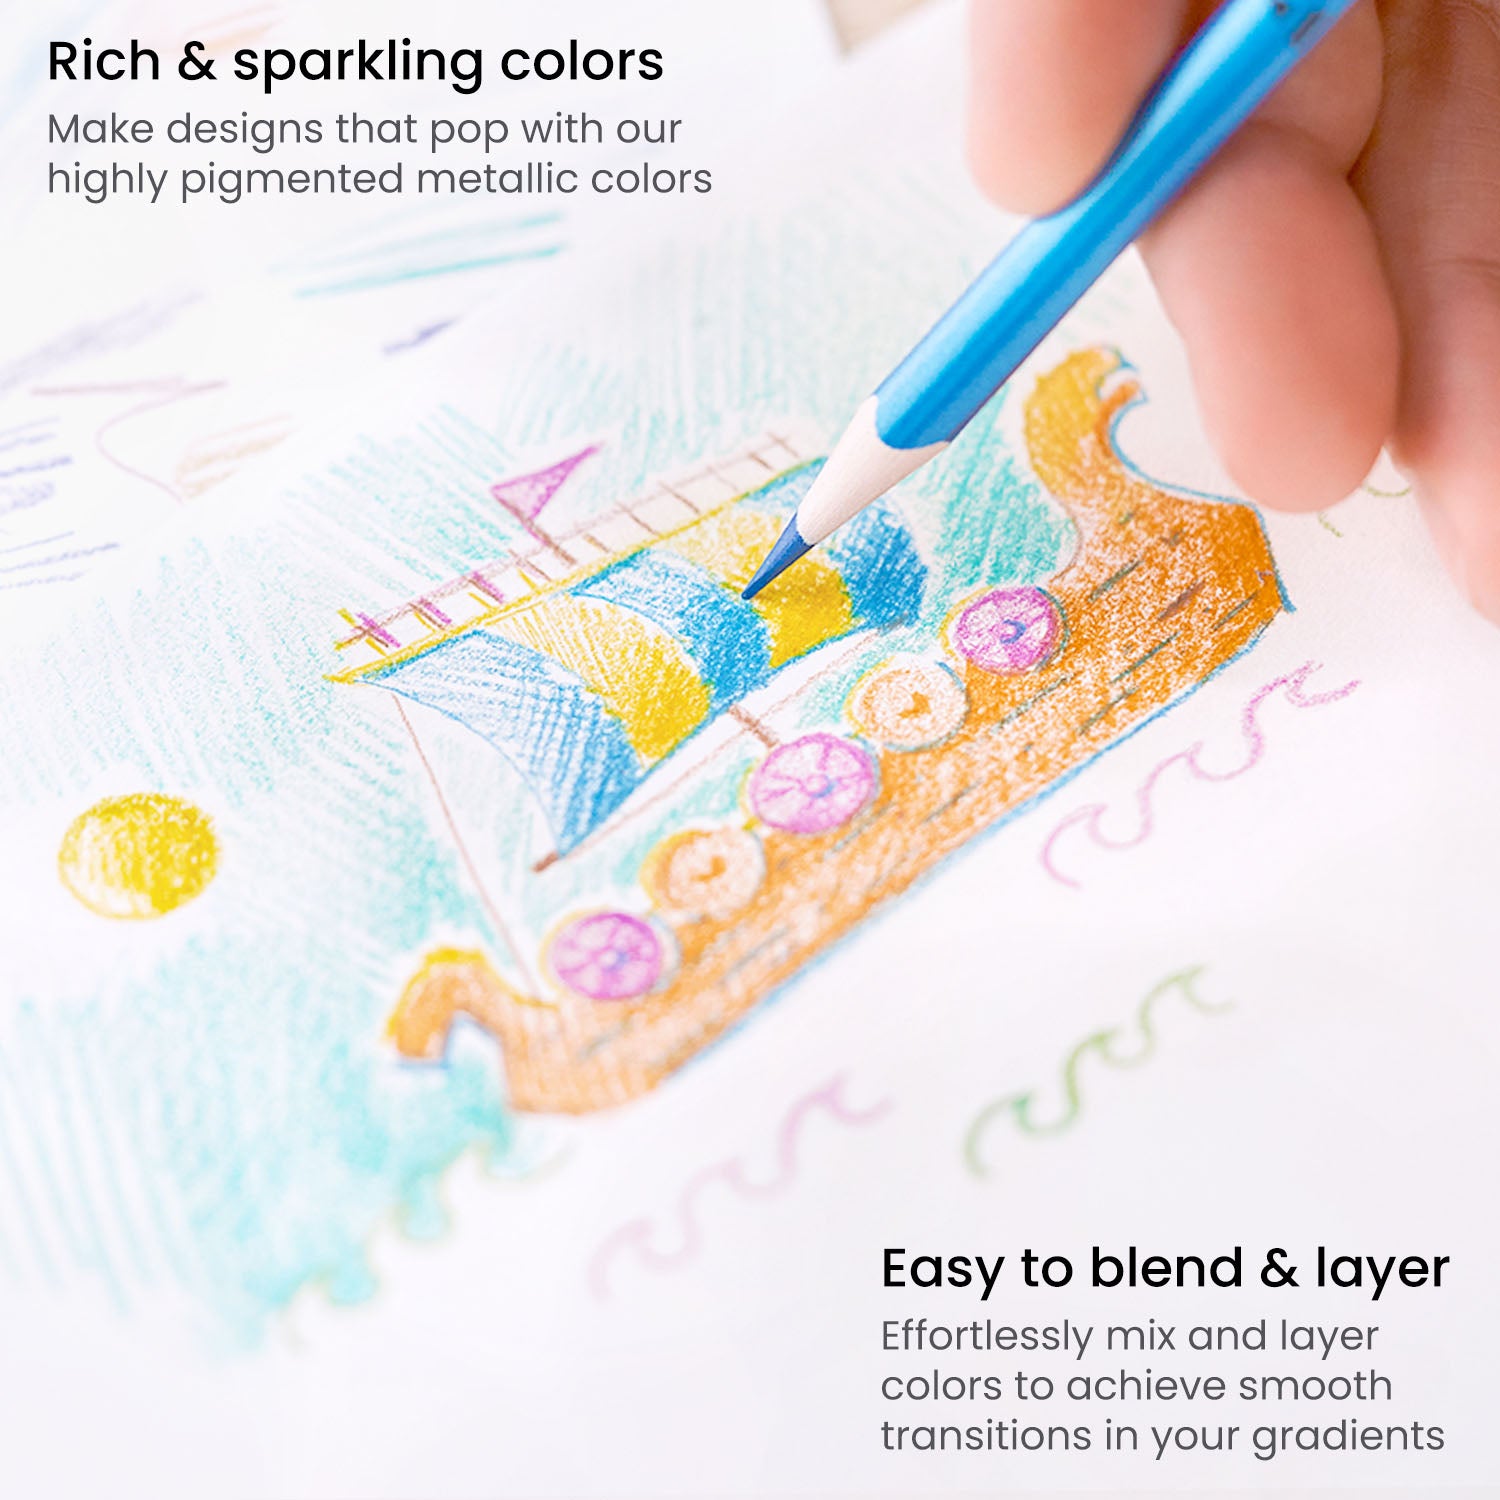 Coloring with Metallic Colored Pencils